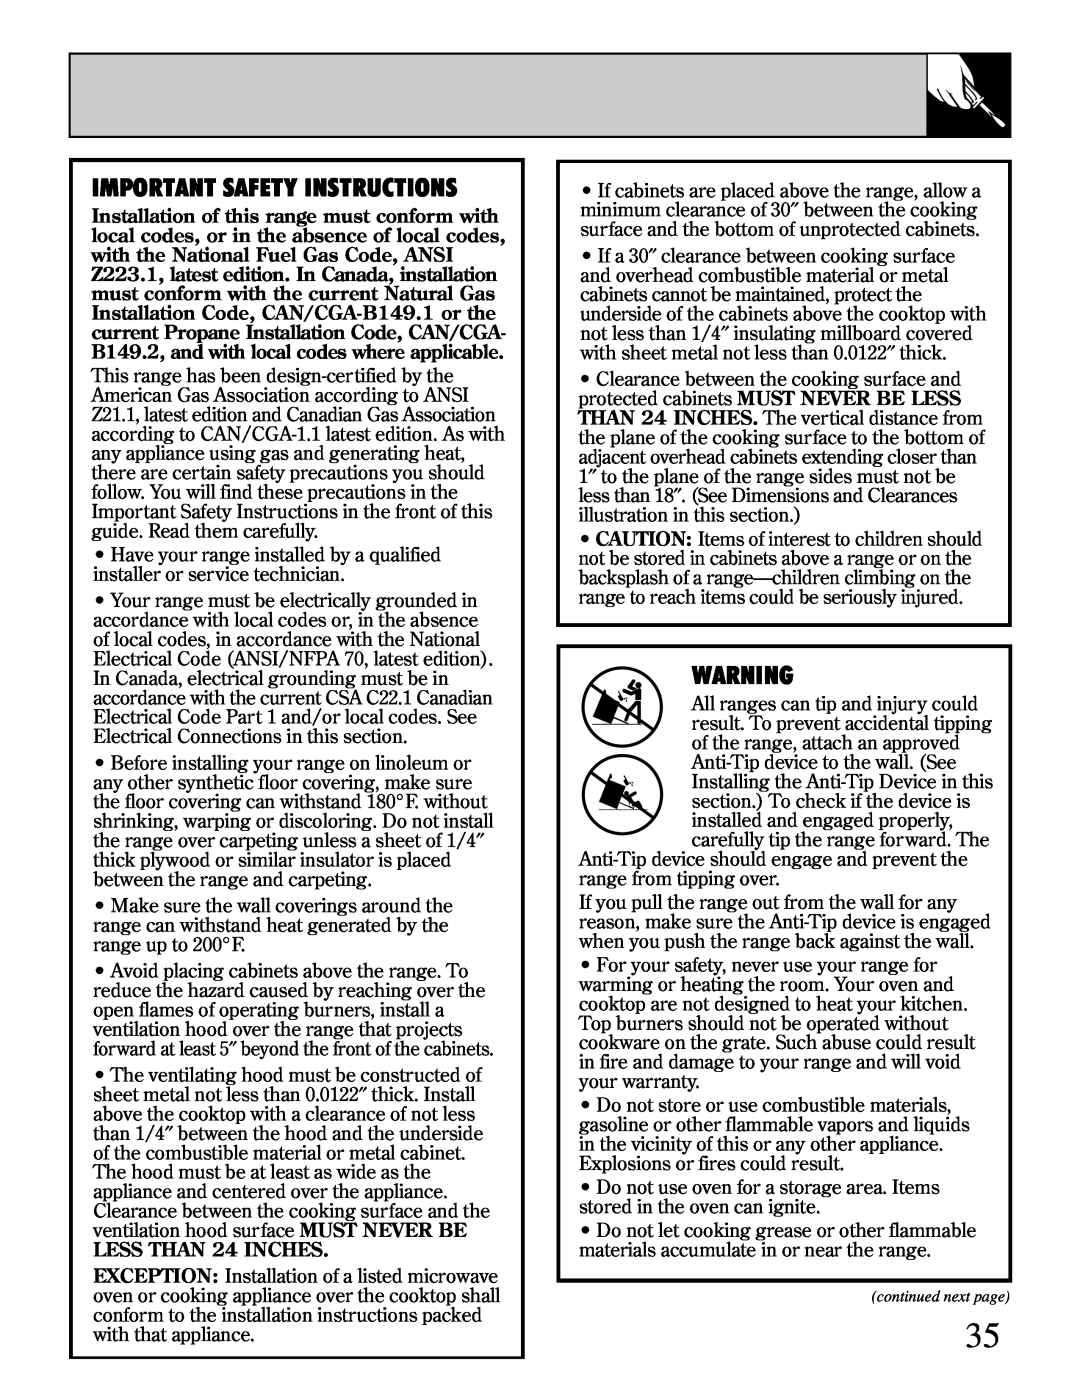 GE JGBP38 installation instructions Important Safety Instructions, LESS THAN 24 INCHES 